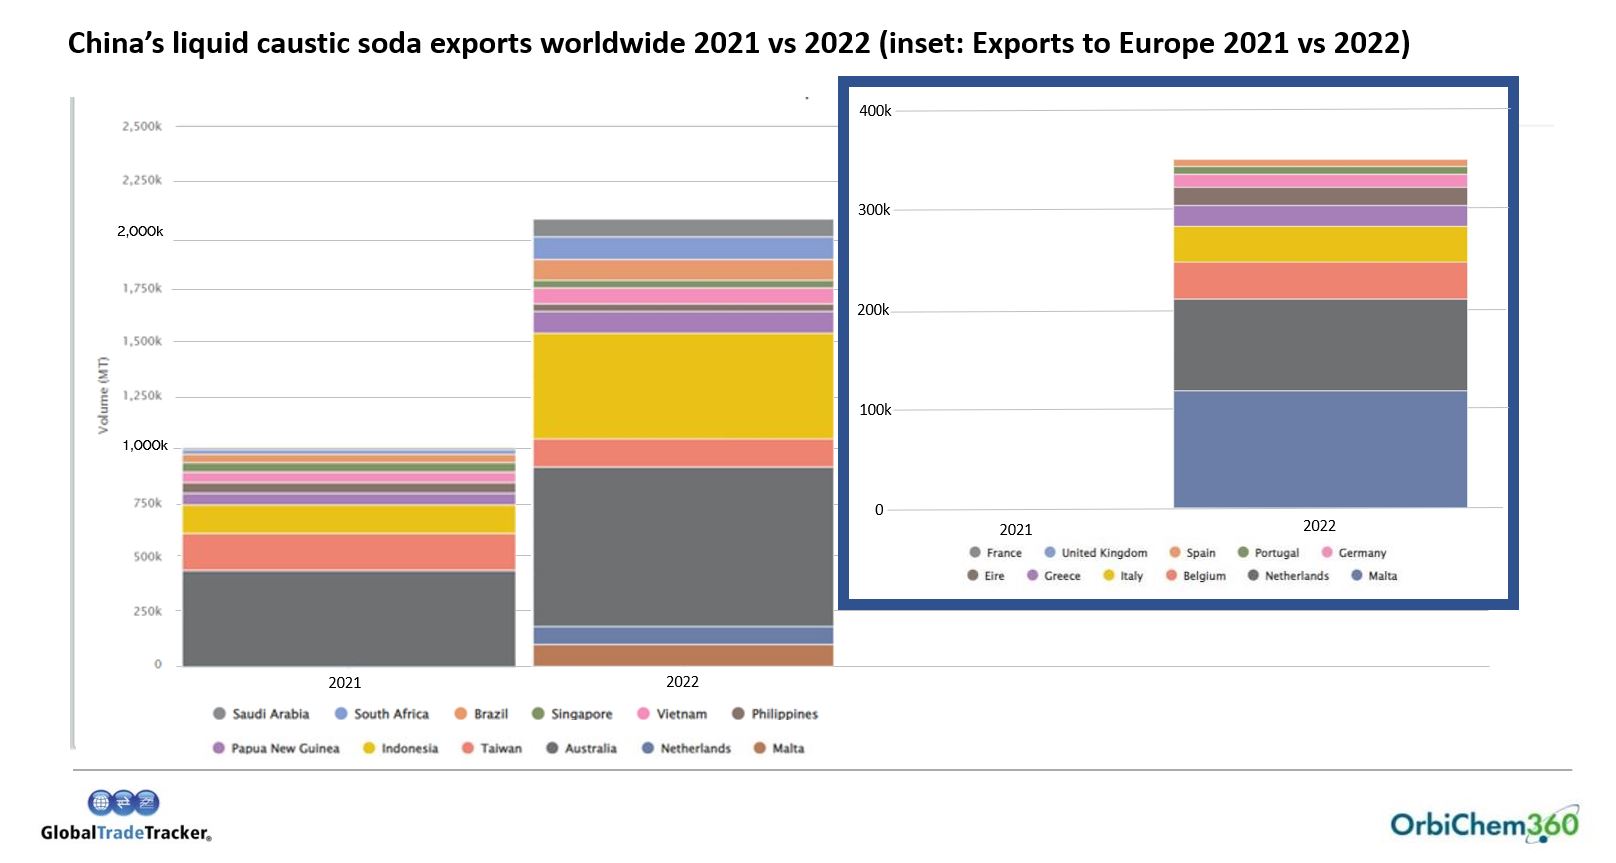 Bar charts showing the doubling in caustic soda exports by China 2021 versus 2022 - and in the inset, to Europe  from nothing to over 300k in 2022.